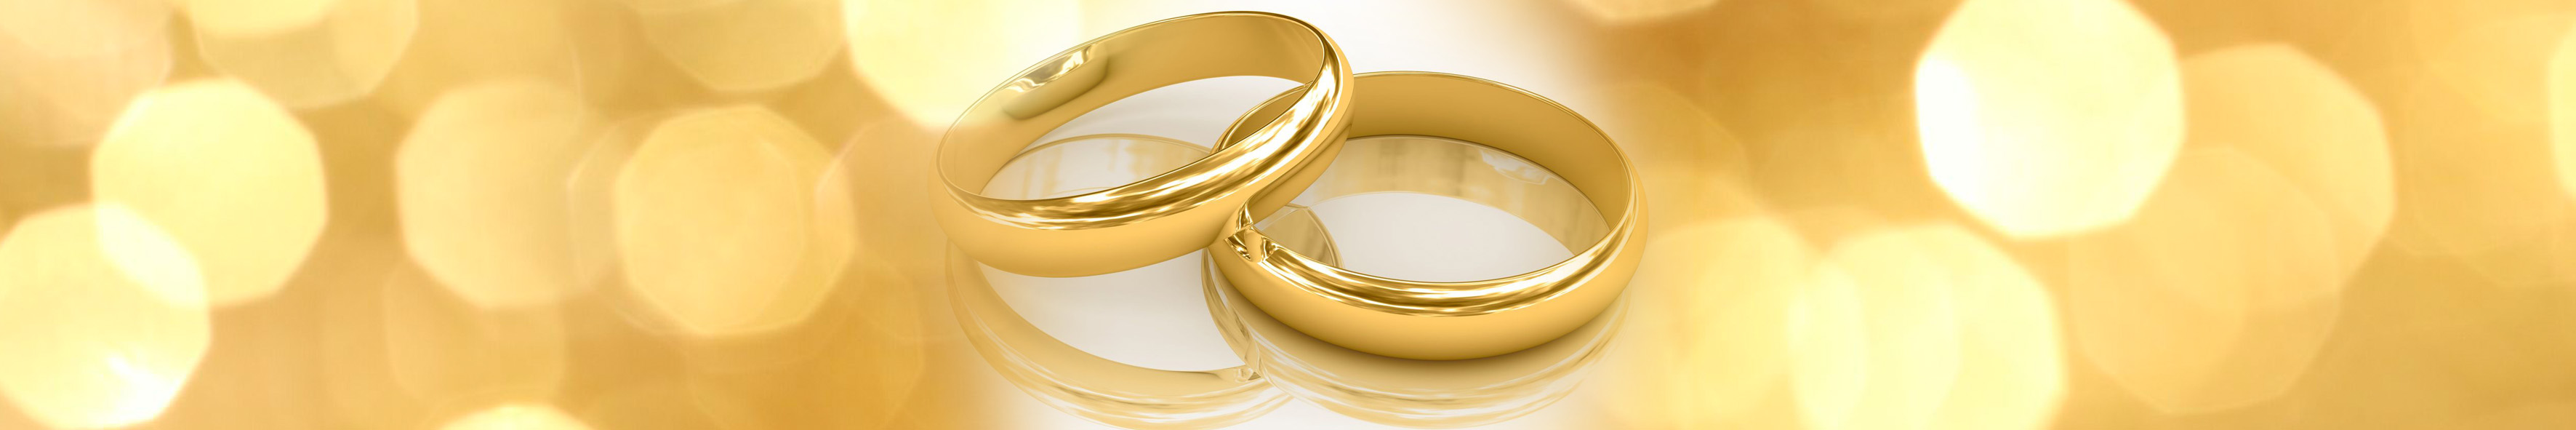 Wedding Rings on a golden background